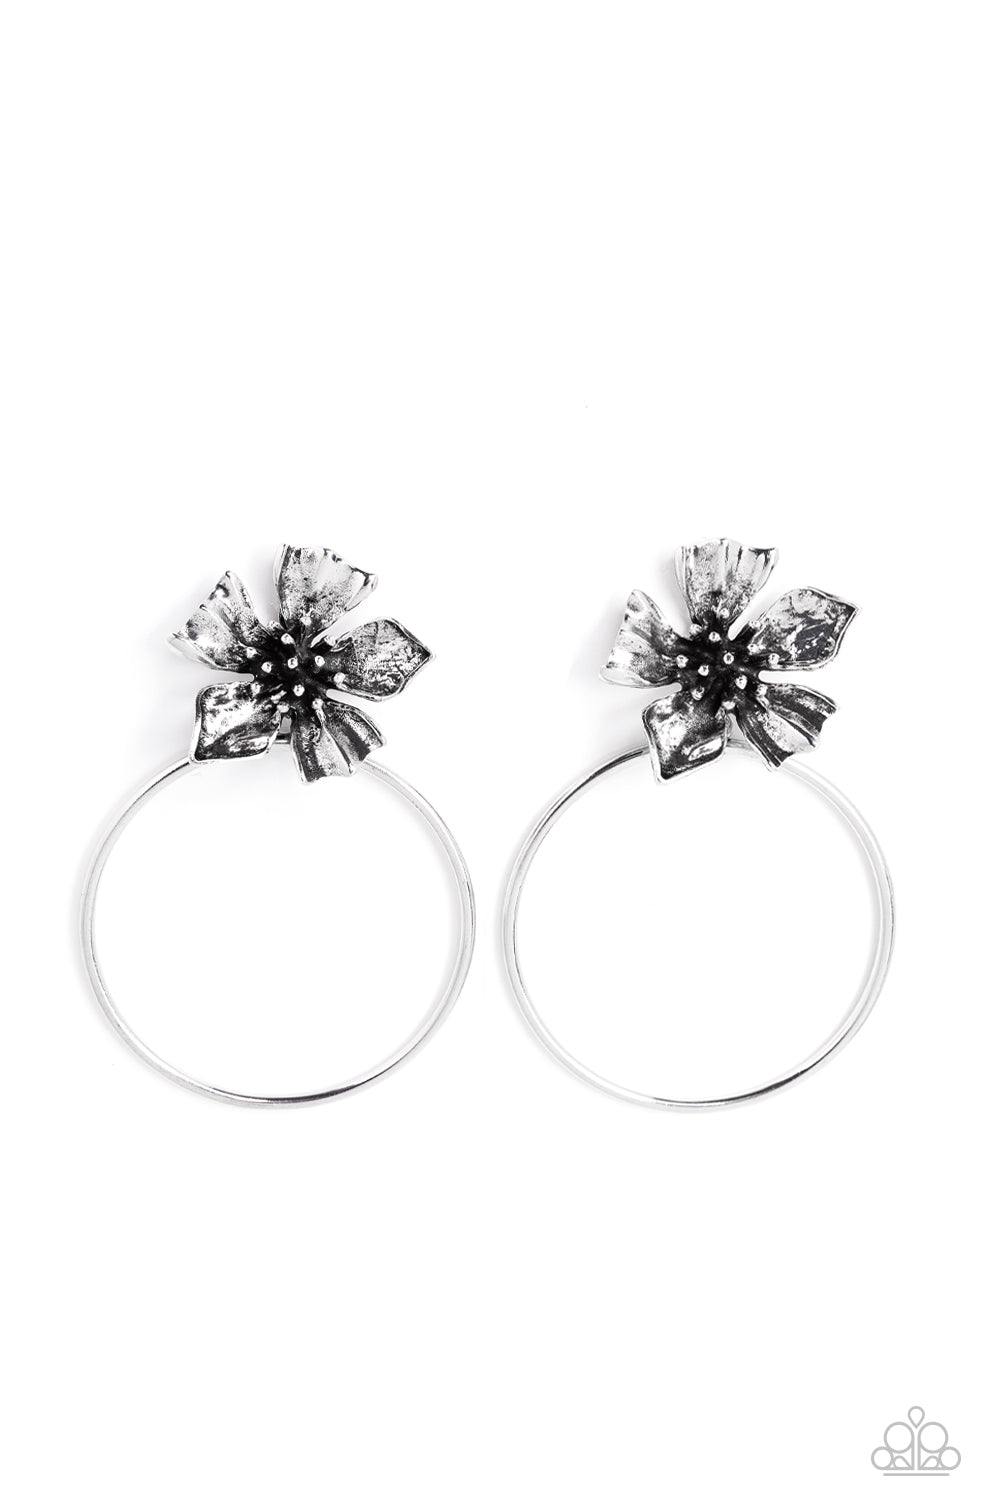 beesblingbash-buttercup-bliss-silver-post earrings-paparazzi-accessories